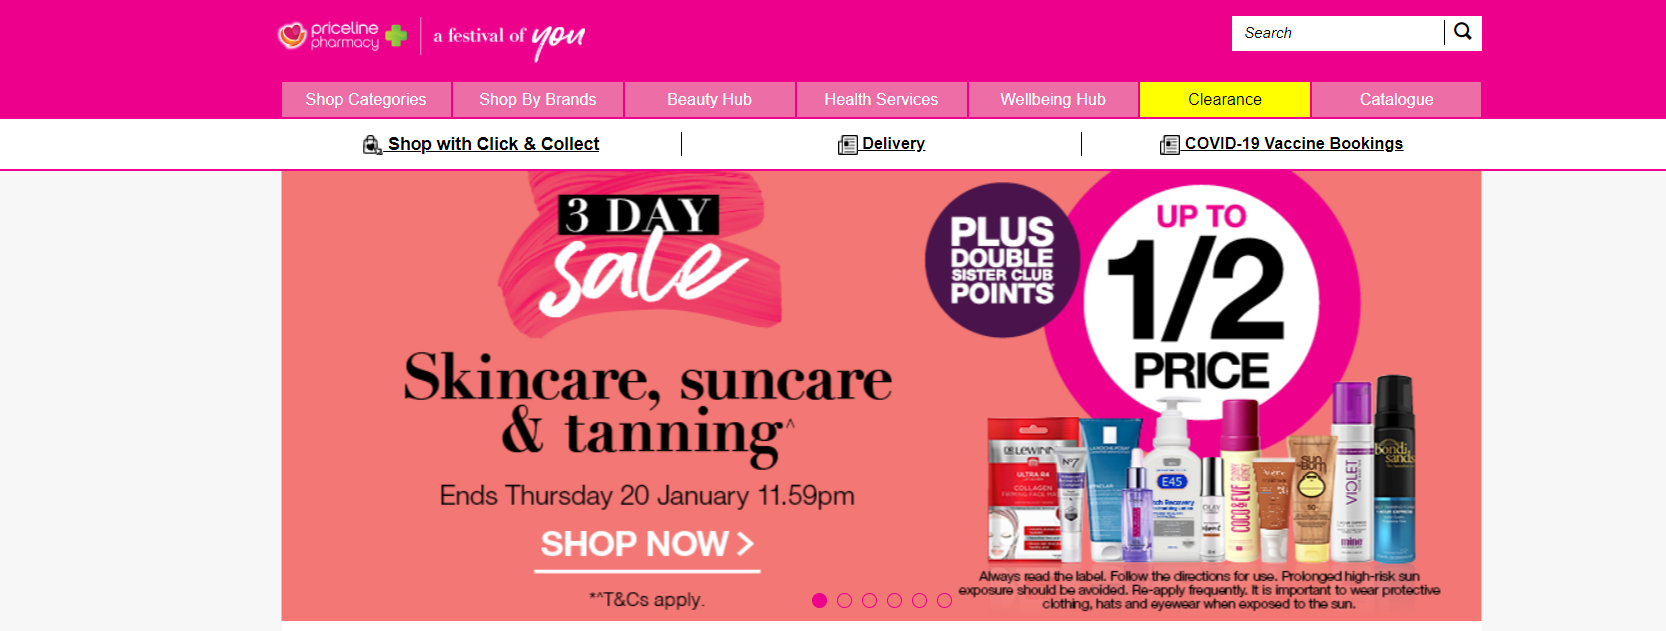 Priceline up to 50% OFF on suncare, tanning, & skincare range + Double Sister Club points